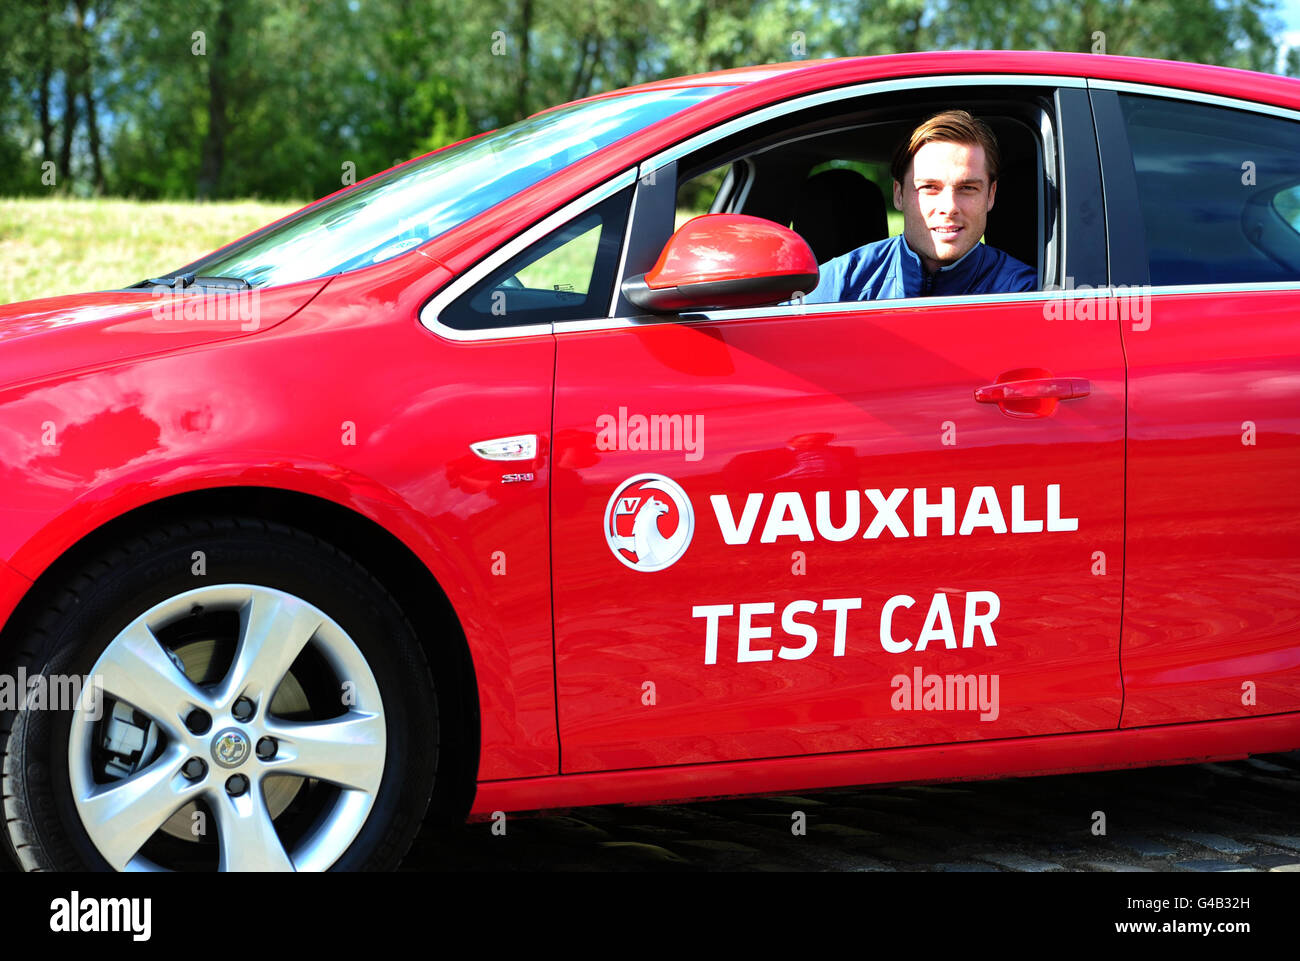 England International Scott Parker during the visit to Millbrook Testing Facility, in Millbrook. Stock Photo